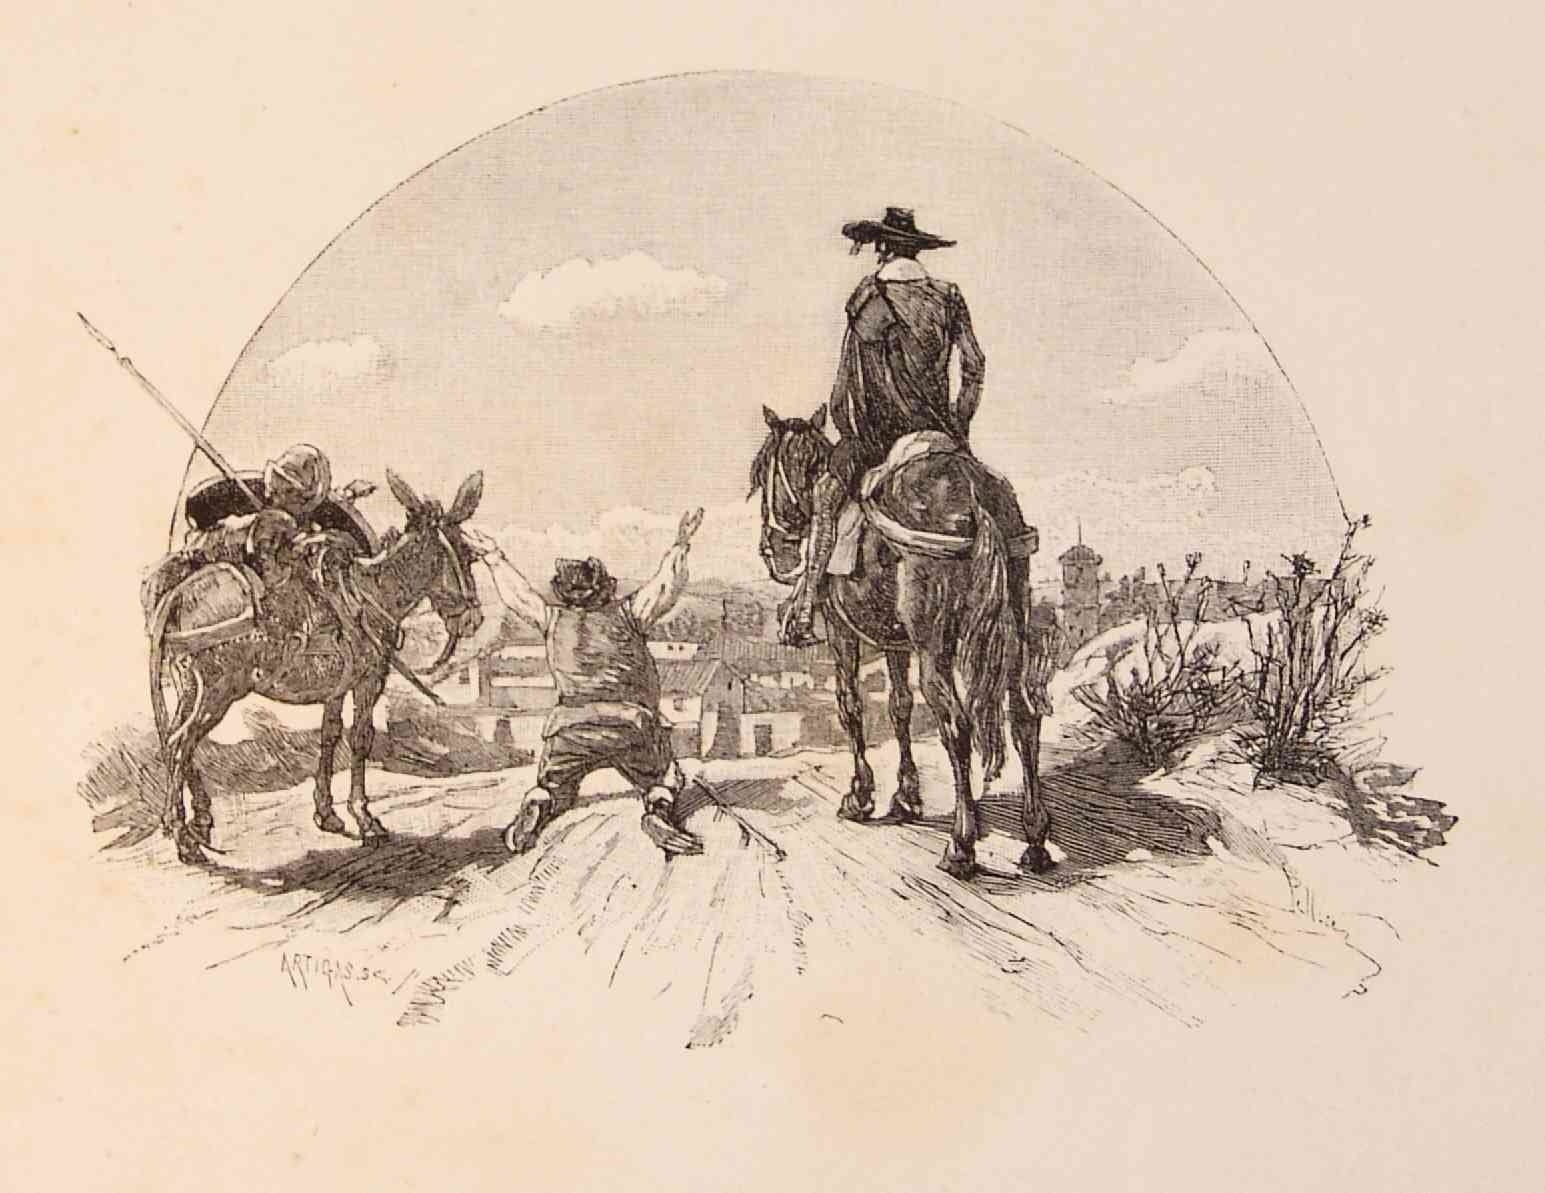 an illustration from a book showing two cowboys on horses